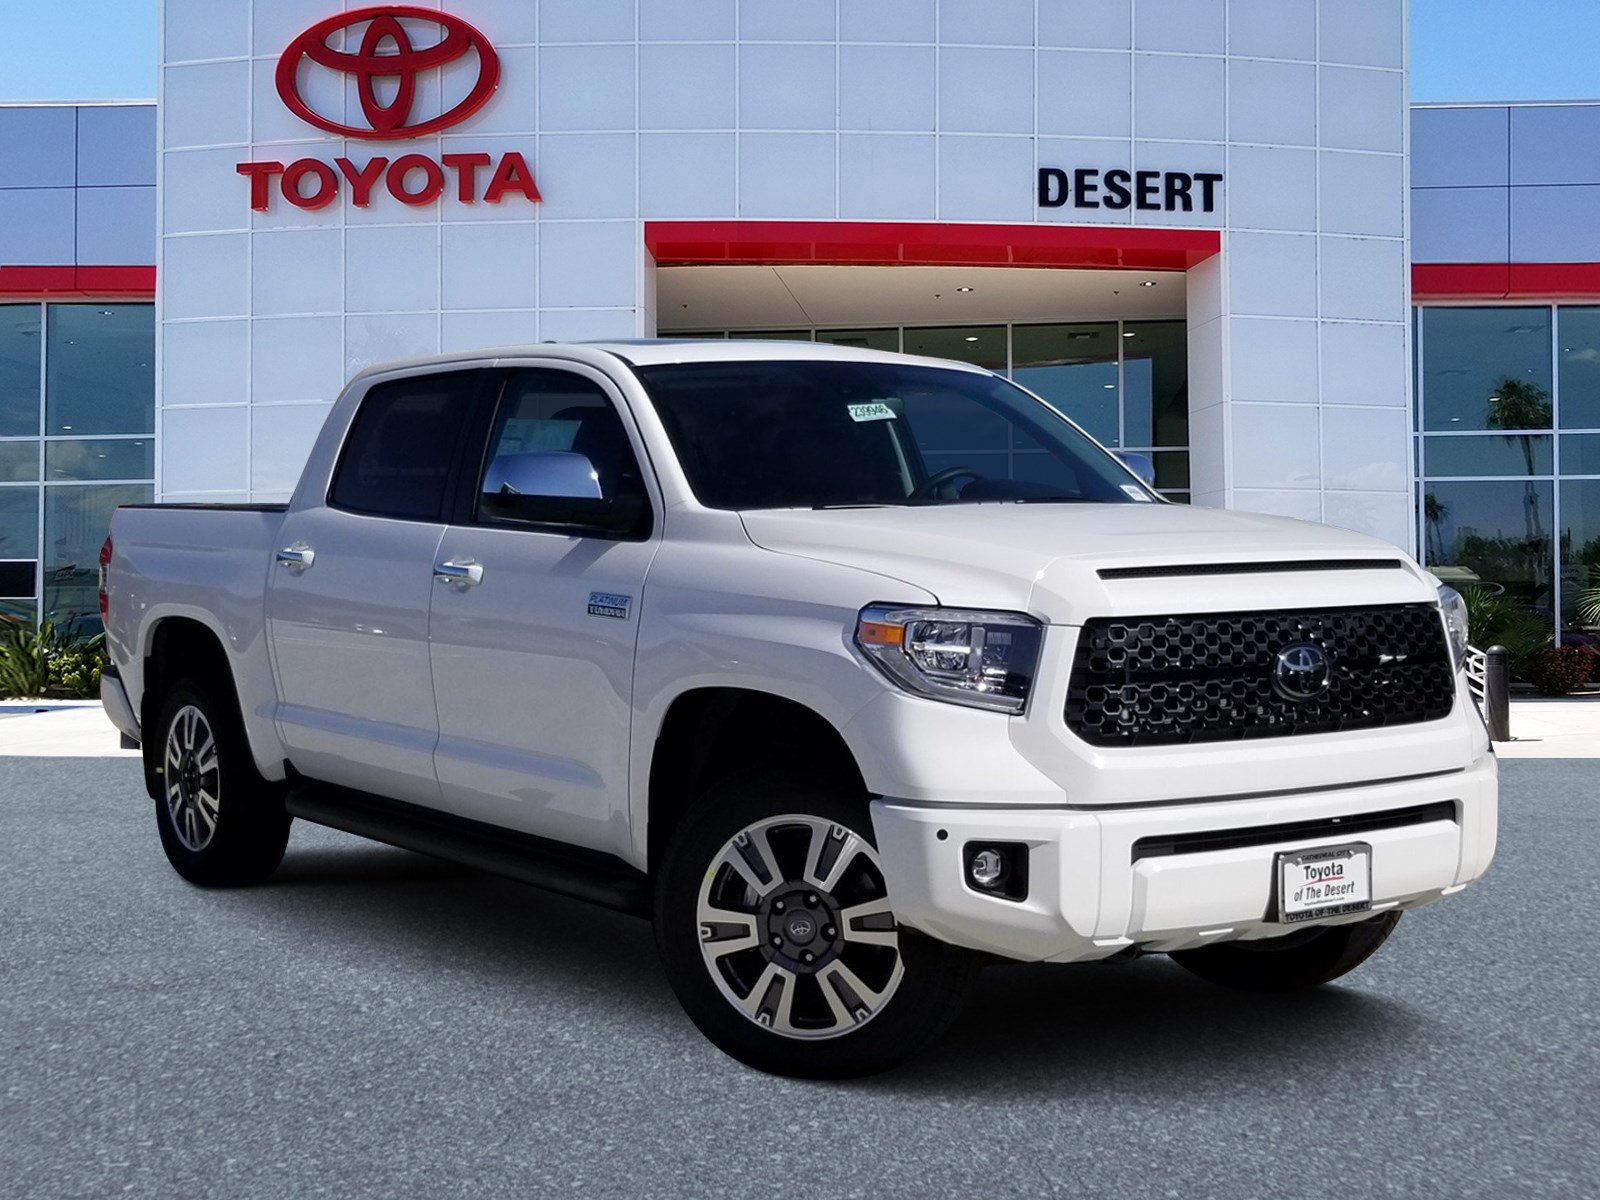 New 2020 Toyota Tundra 4WD 1794 Edition Crew Cab Pickup in Cathedral